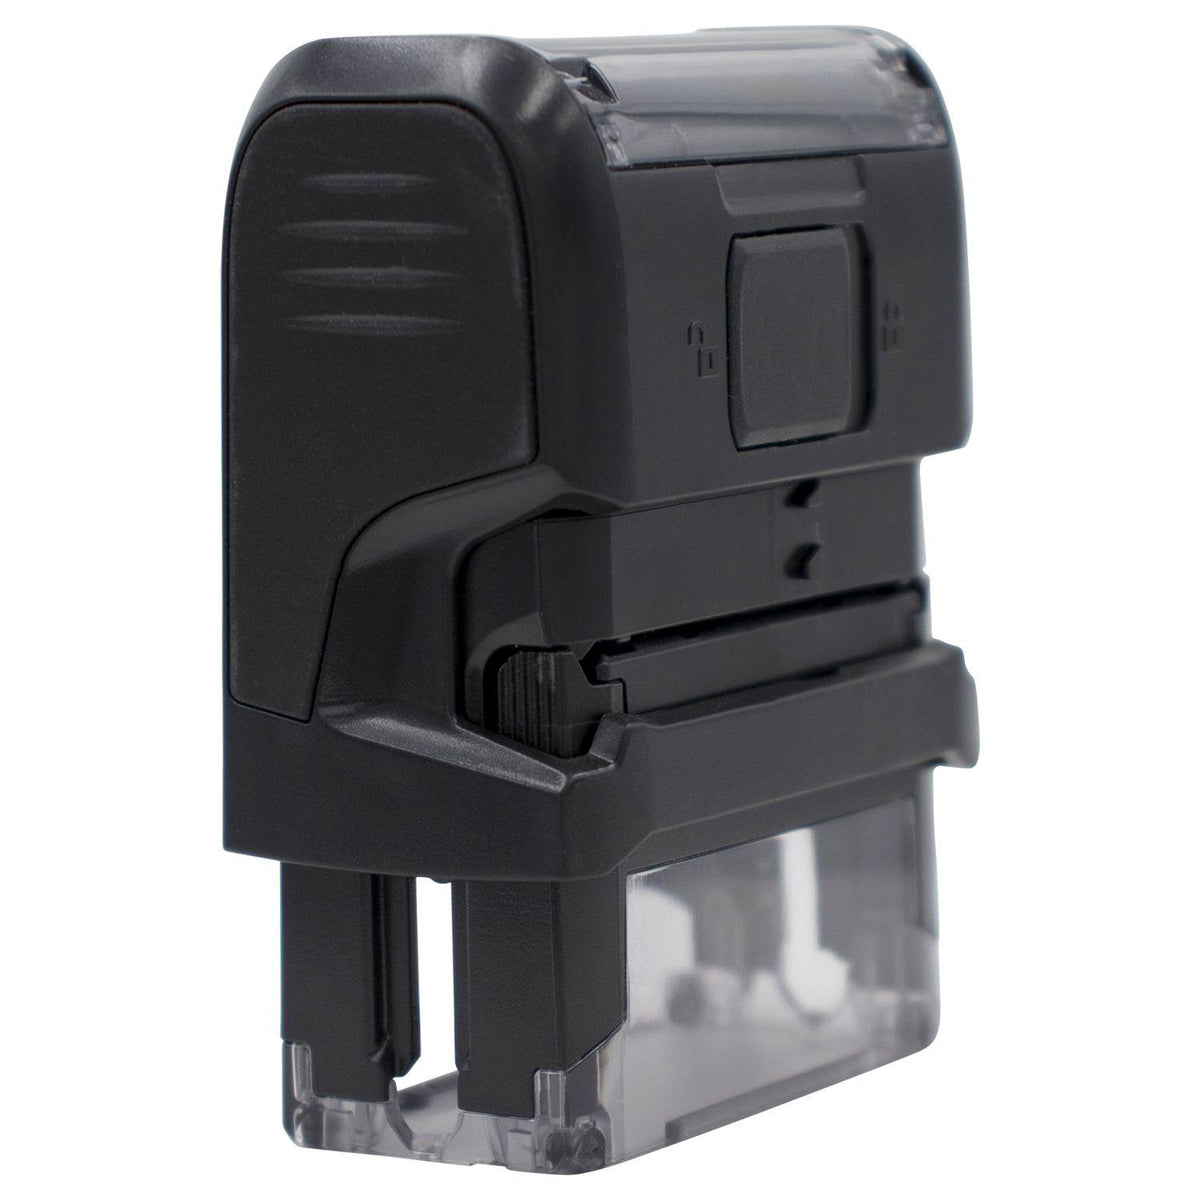 Self-Inking Void with Strikelines Stamp - Engineer Seal Stamps - Brand_Trodat, Impression Size_Small, Stamp Type_Self-Inking Stamp, Type of Use_General, Type of Use_Legal, Type of Use_Office